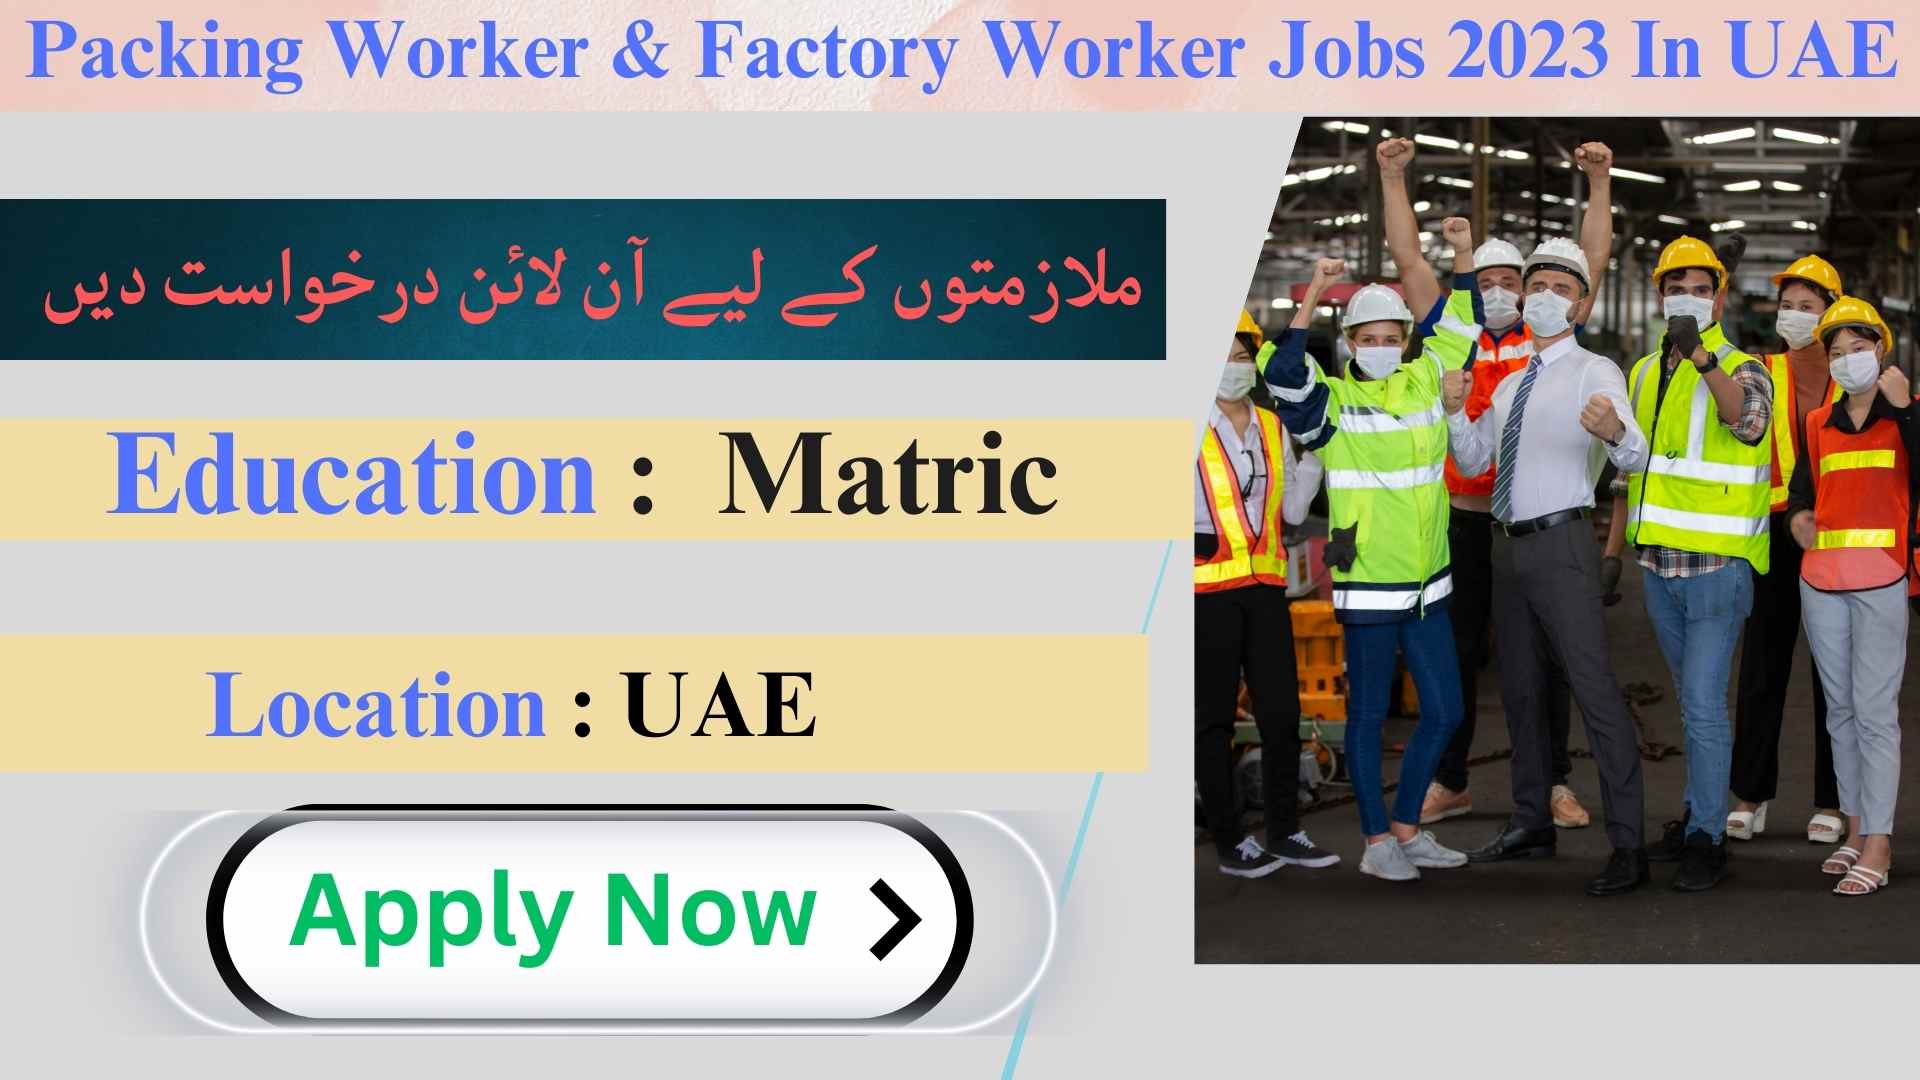 Latest Packing Worker & Factory Worker Jobs 2023 In UAE